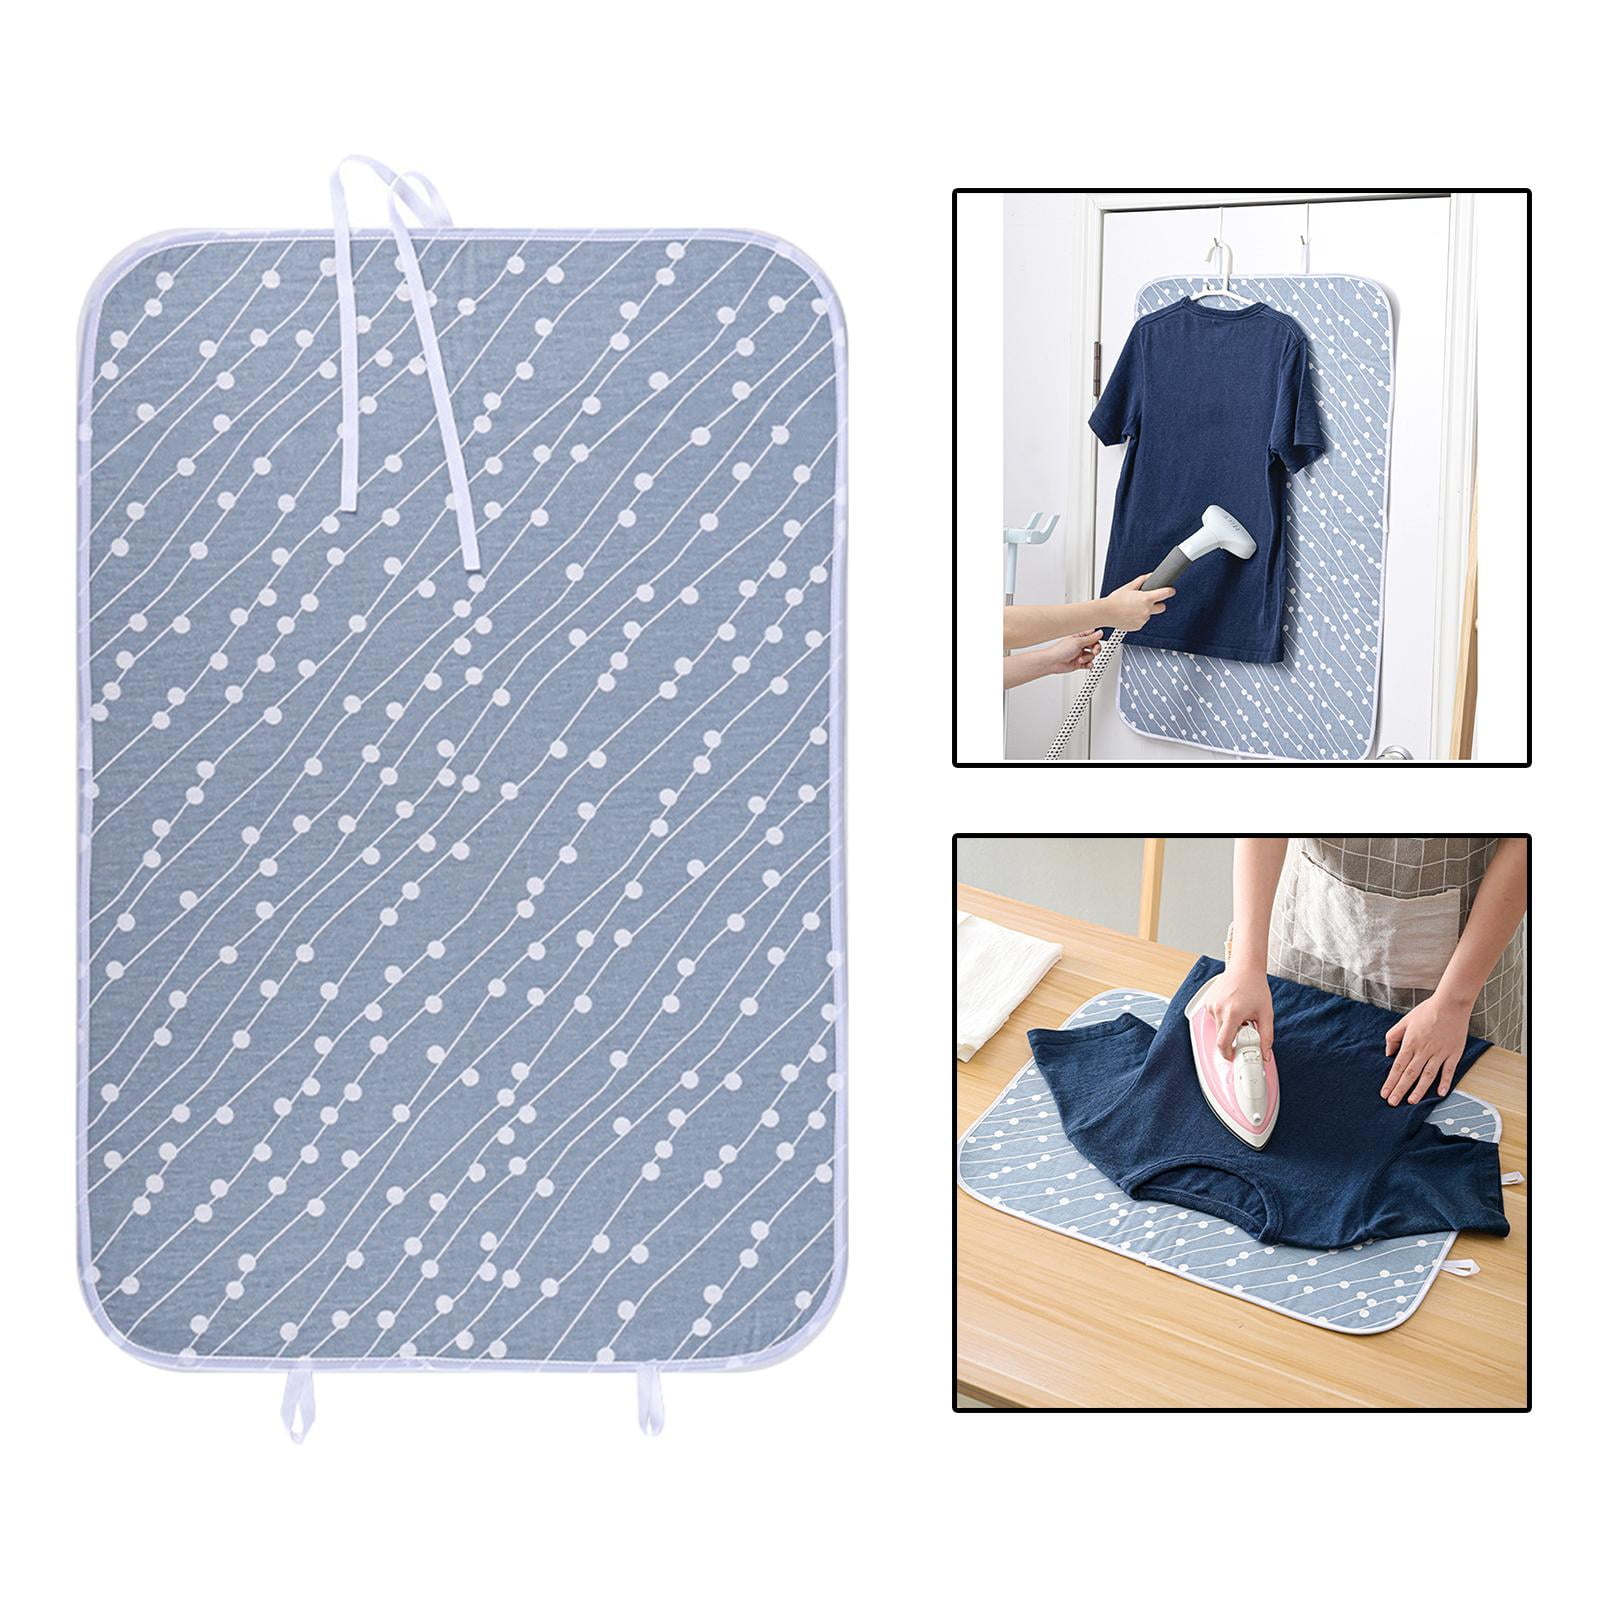 Neccom Ironing Mat with Silicone Pad Heat Resistant Ironing Blanket, Thick  Portable Travel Ironing Pad for Table Top, Washer and Dryer, Cotton Ironing